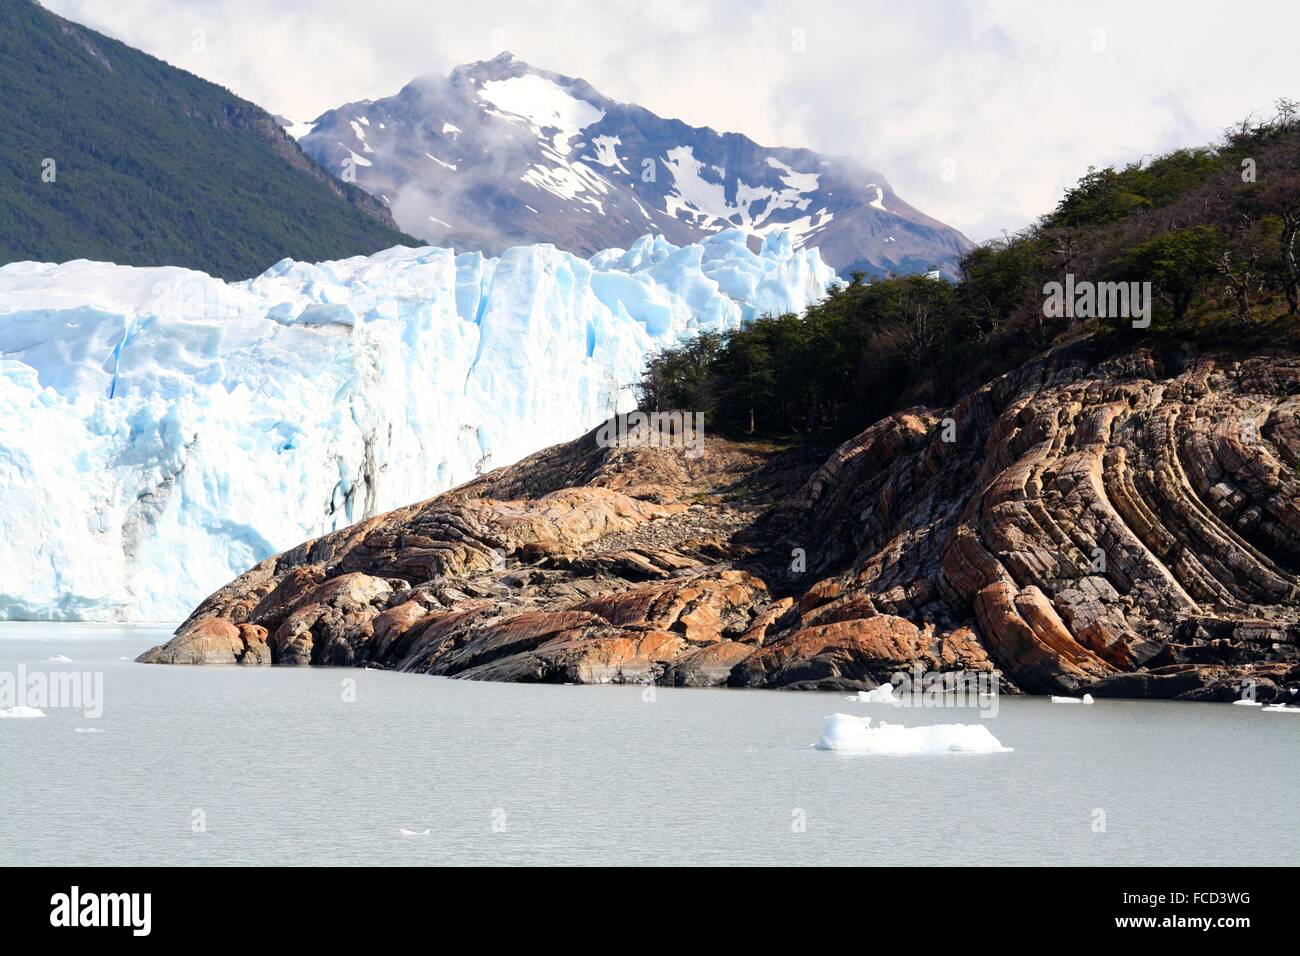 Impressive Geological Formation In A Spectacular Glacial Environment Stock Photo